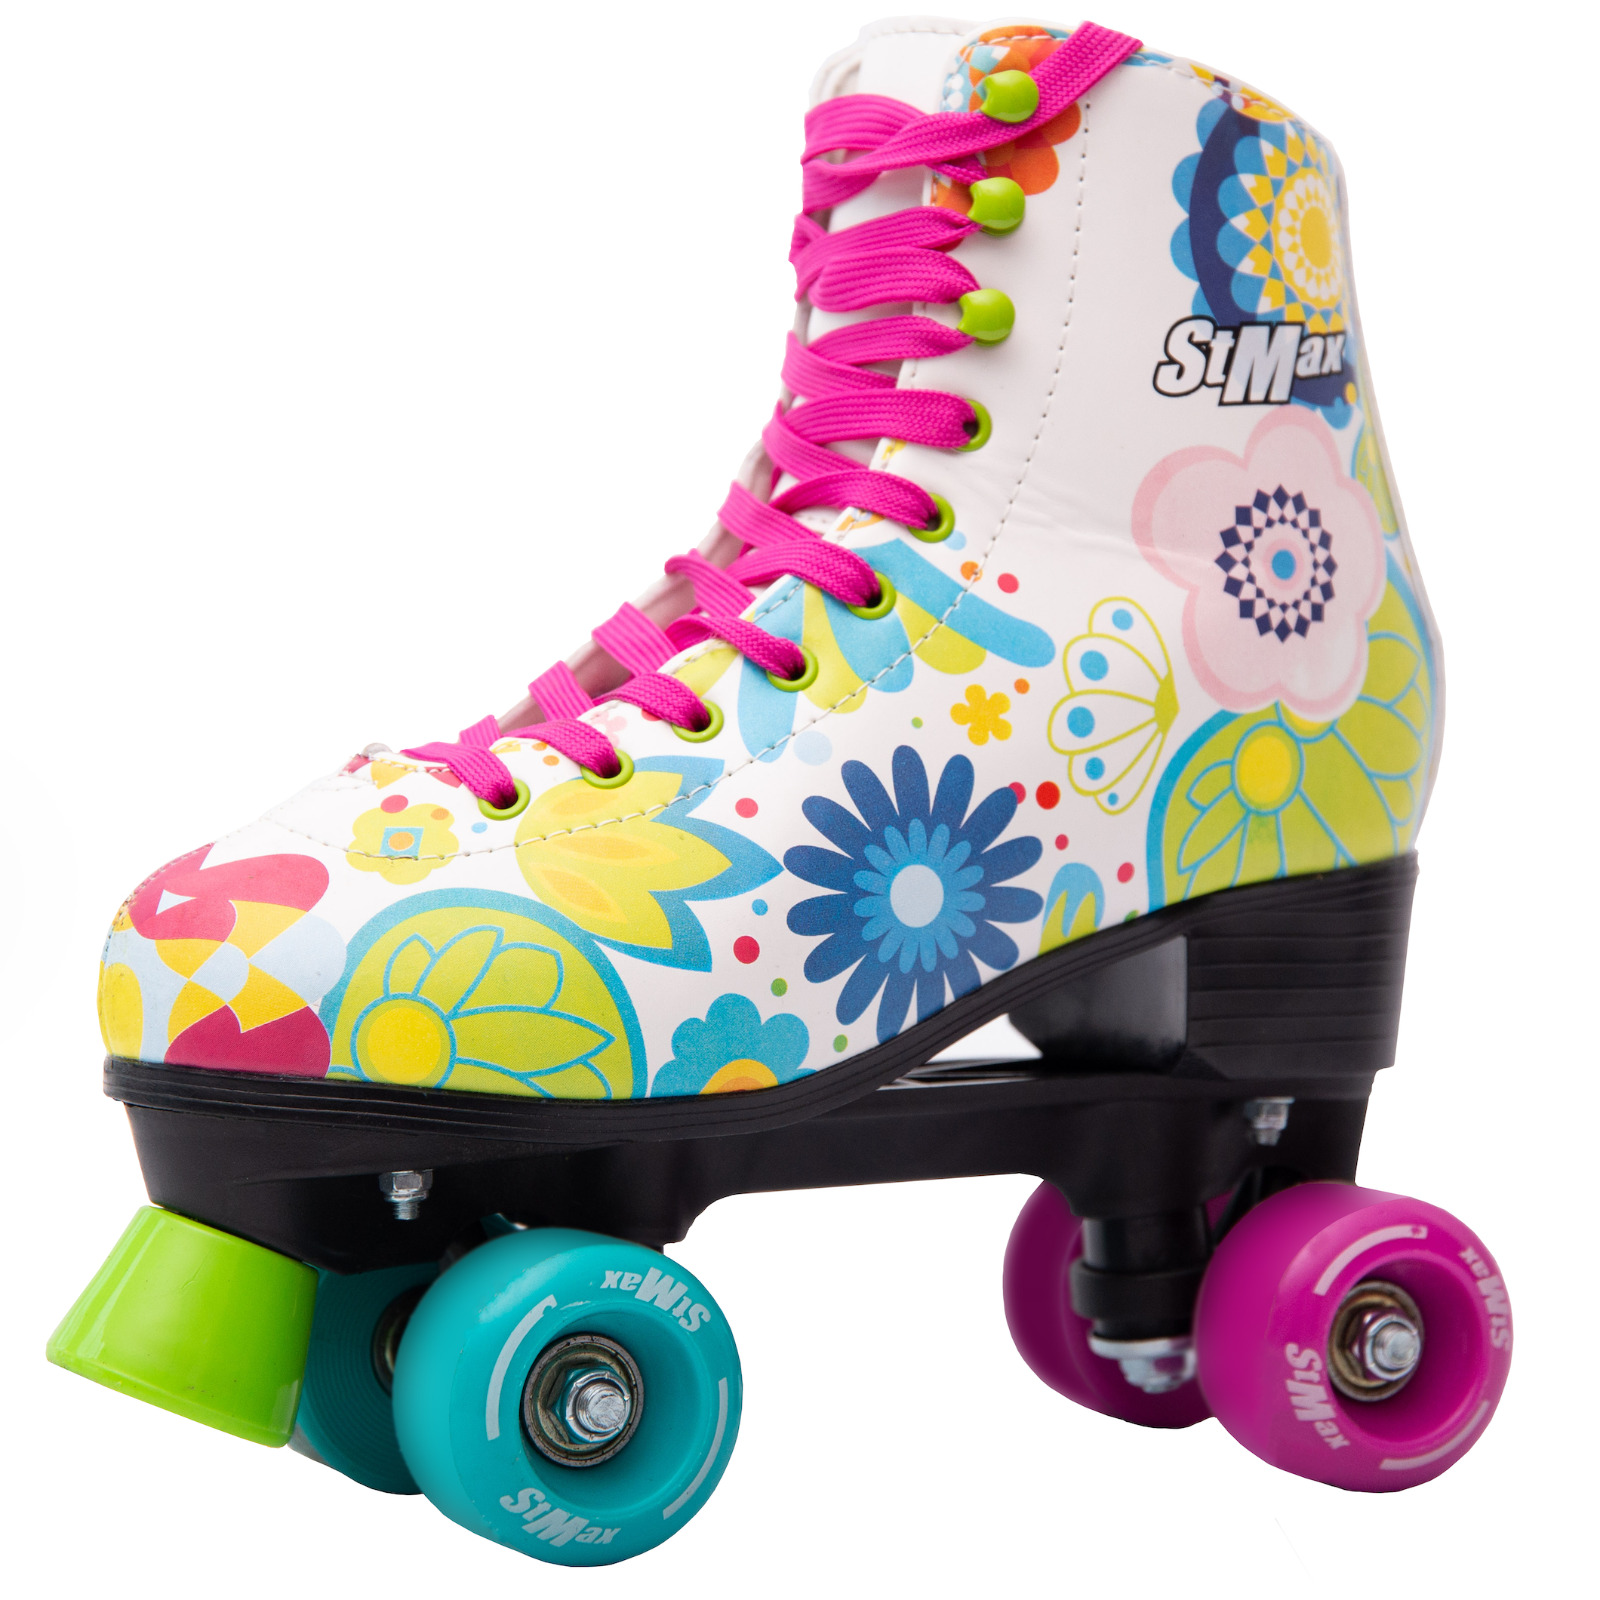 Quad Roller Skates for Girls and Women Size 6 Youth Colorful Flower Rollerskates